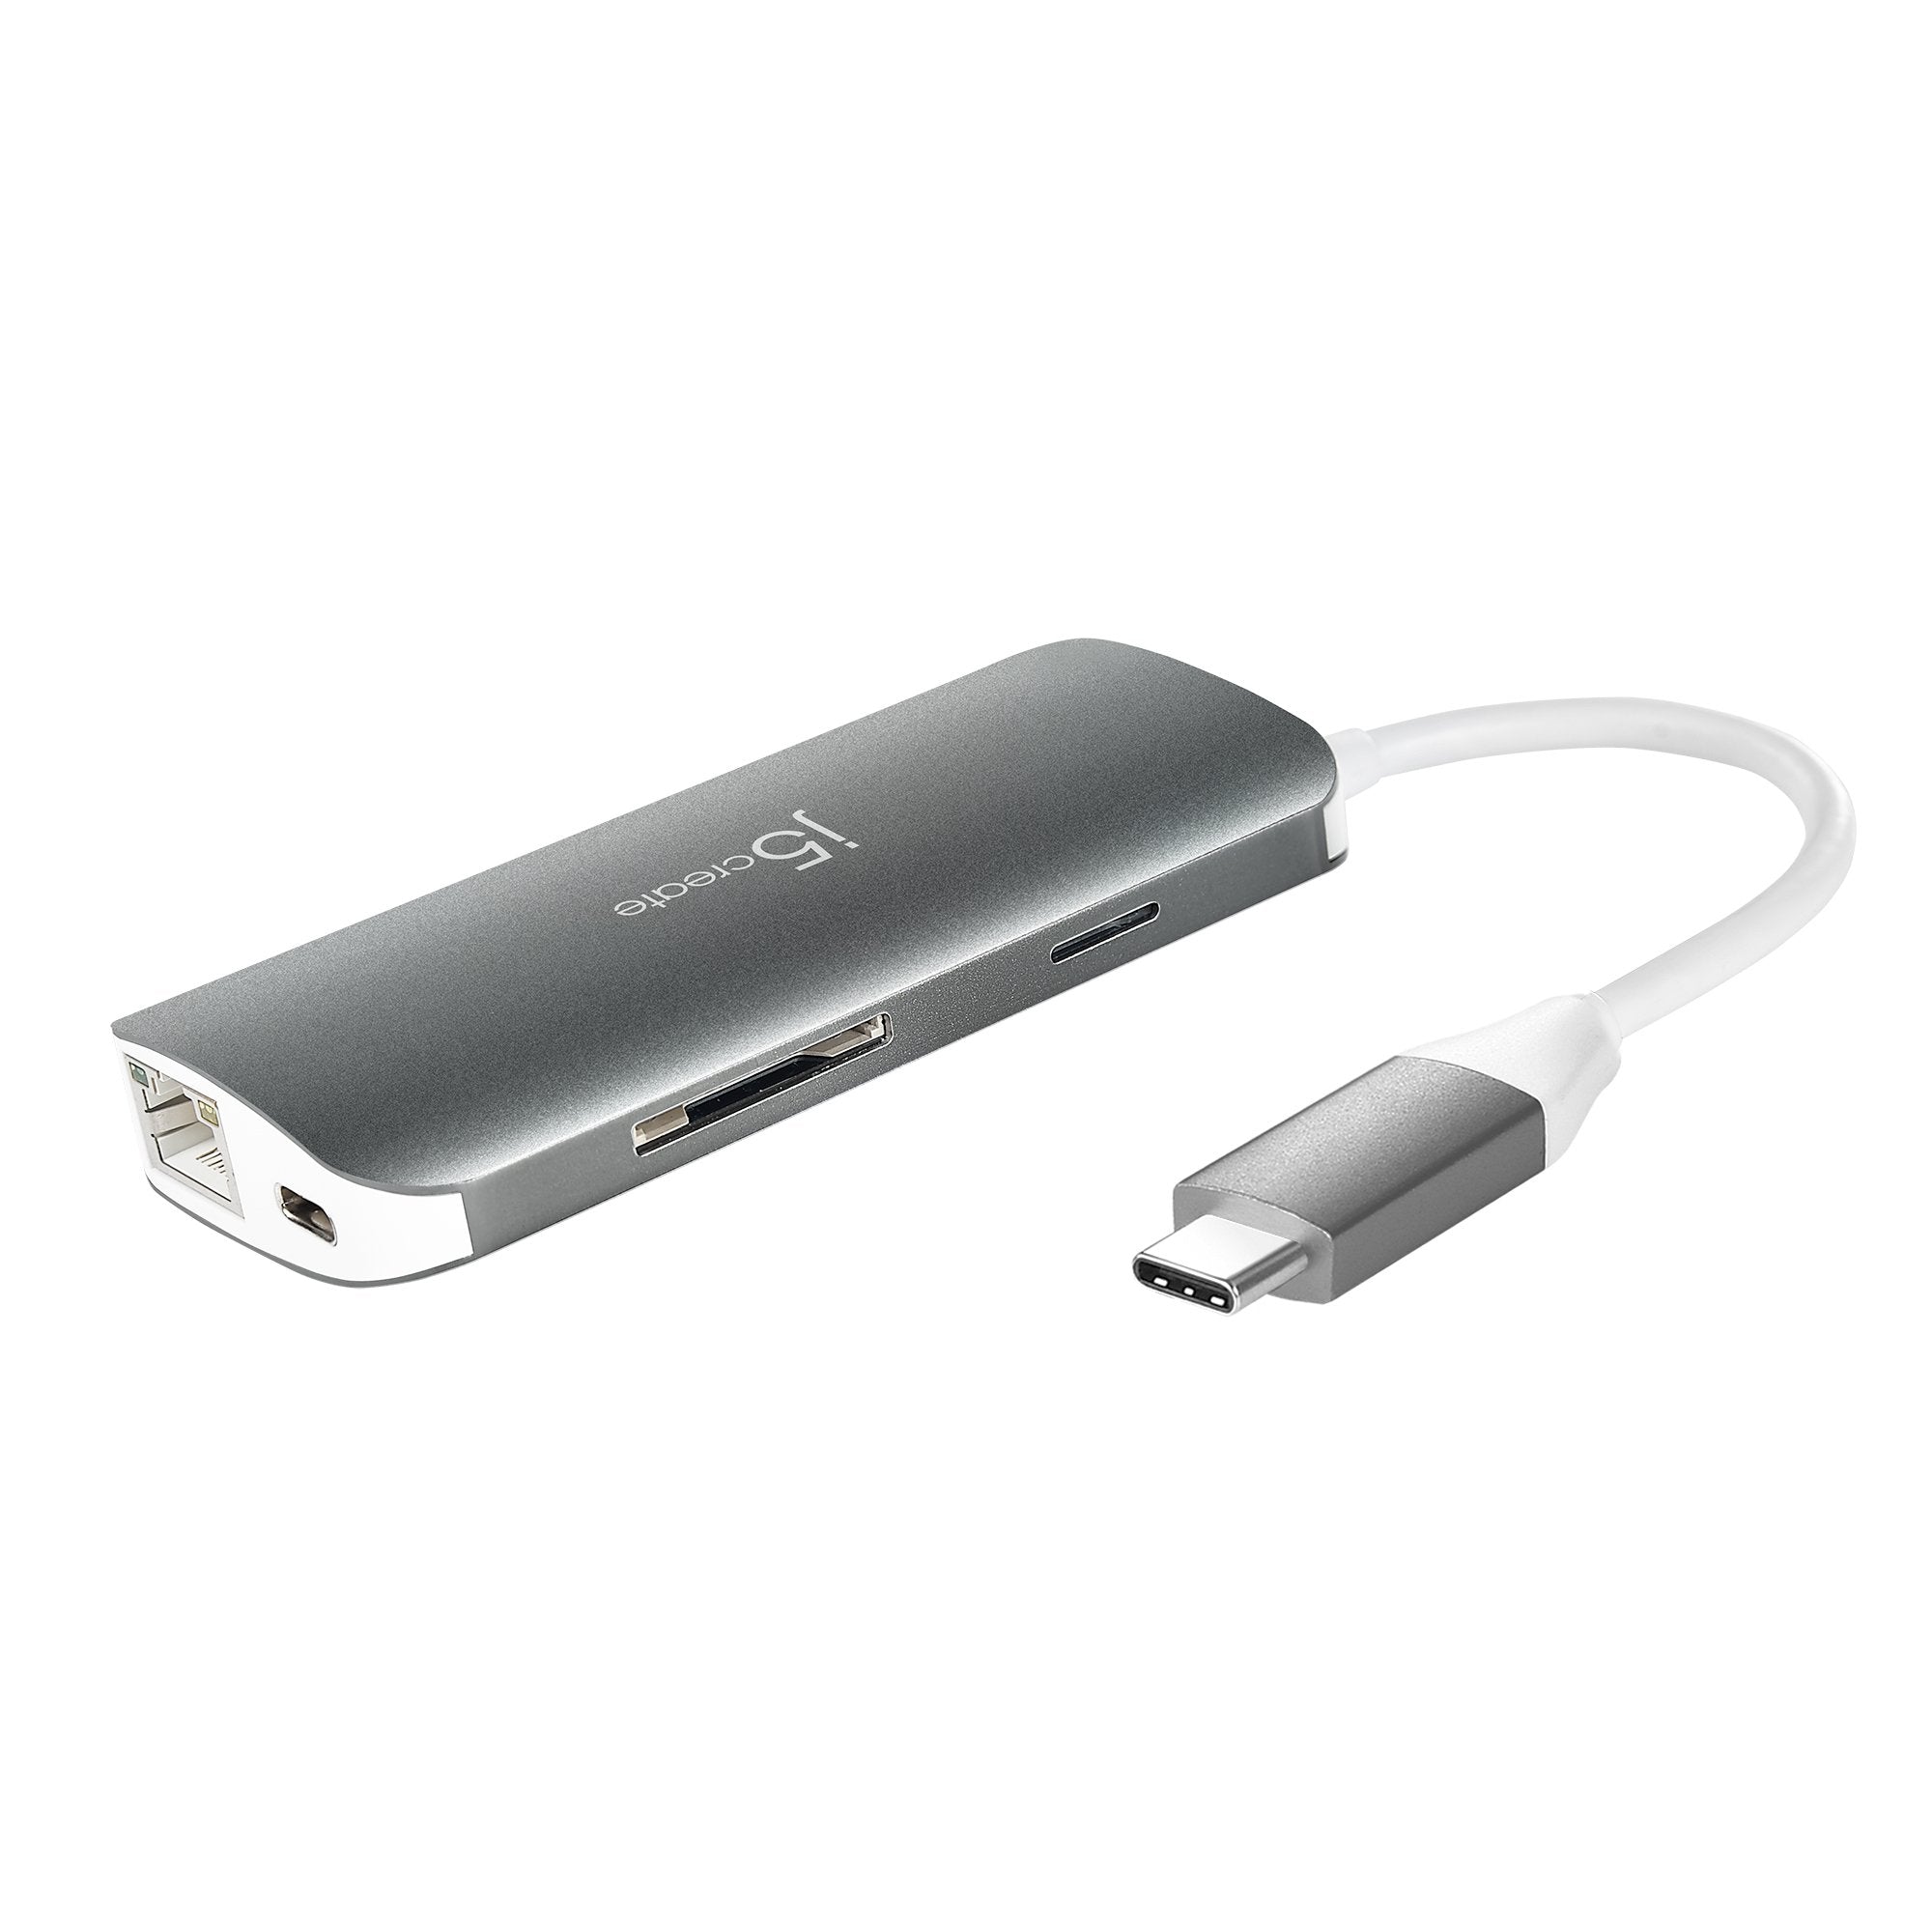 USB C to Dual HDMI Adapter, INTPW 4-in-1 Type C to HDMI  Converter/Thunderbolt 3 to 4K HDMI Dual Monitor Adapter, PD Charging, USB  3.0 Port, Compatible